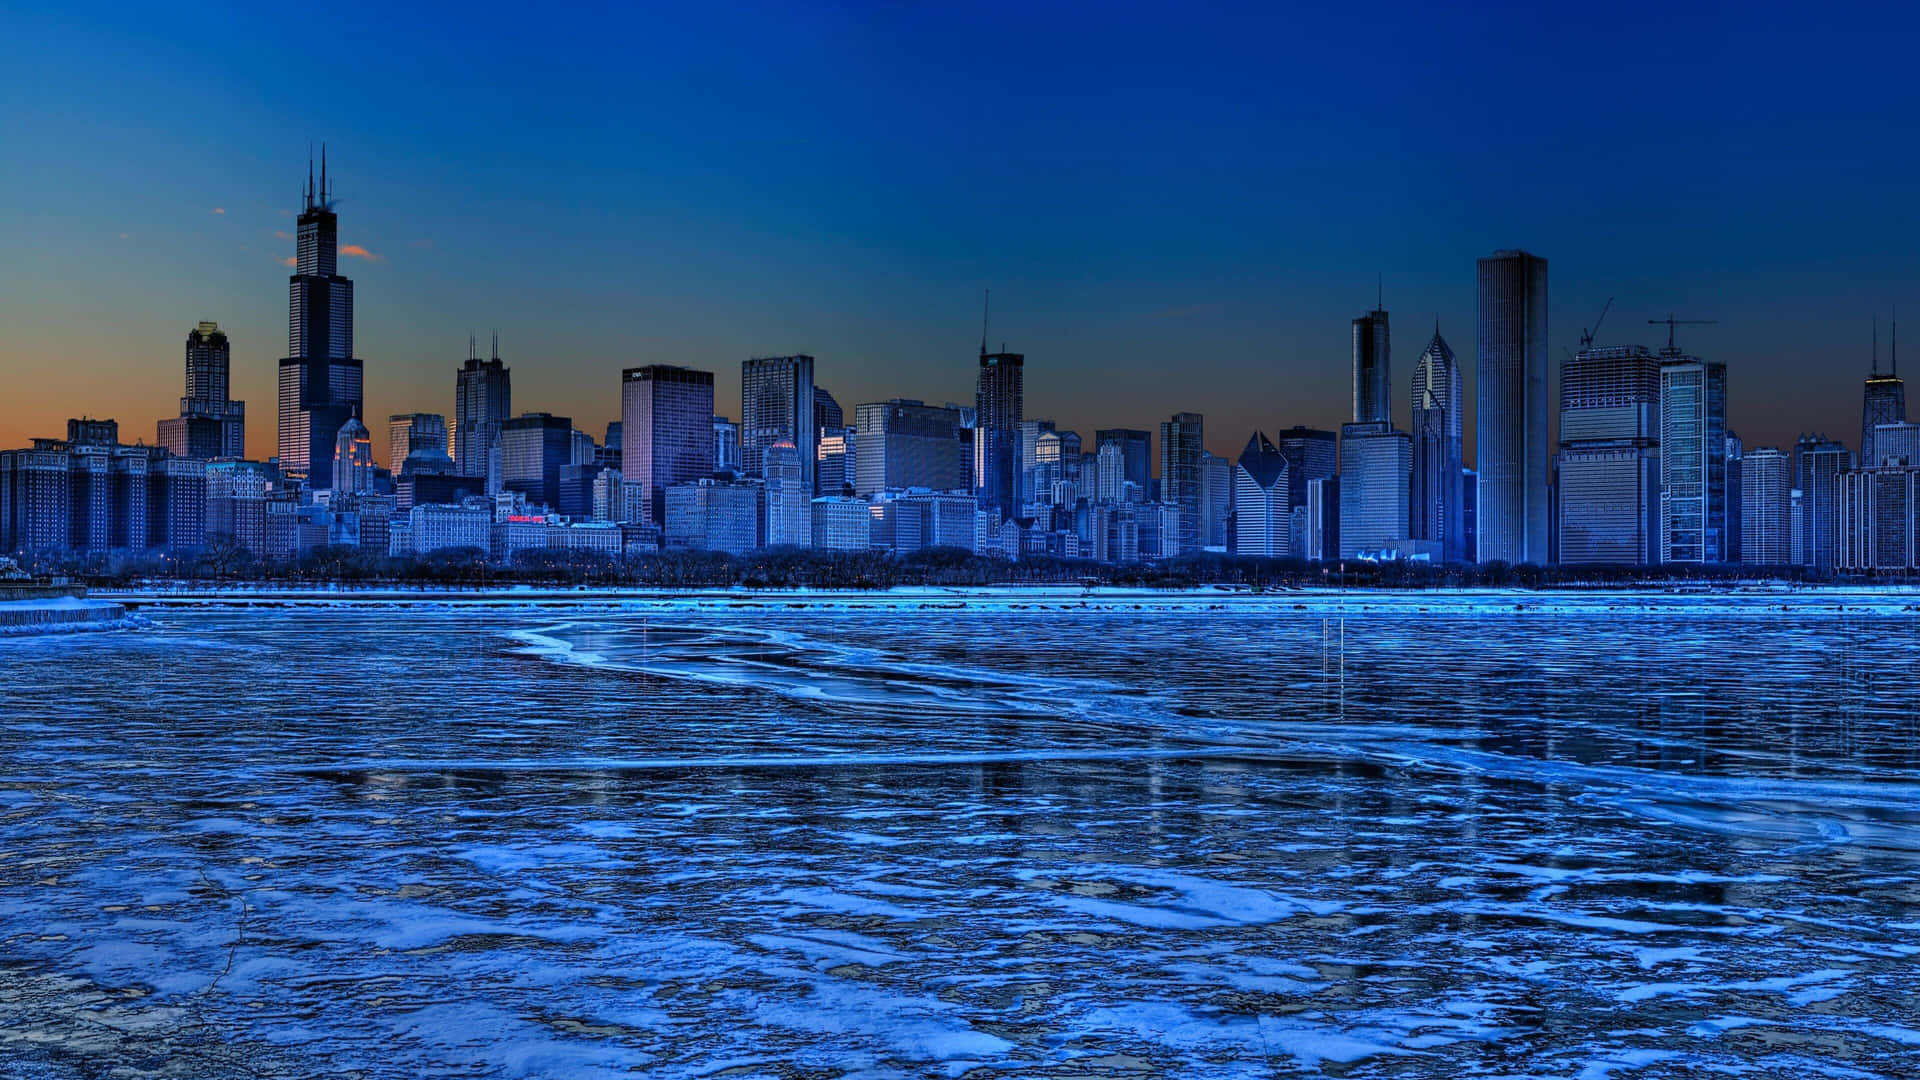 A City Skyline With Ice And Snow In The Background Wallpaper